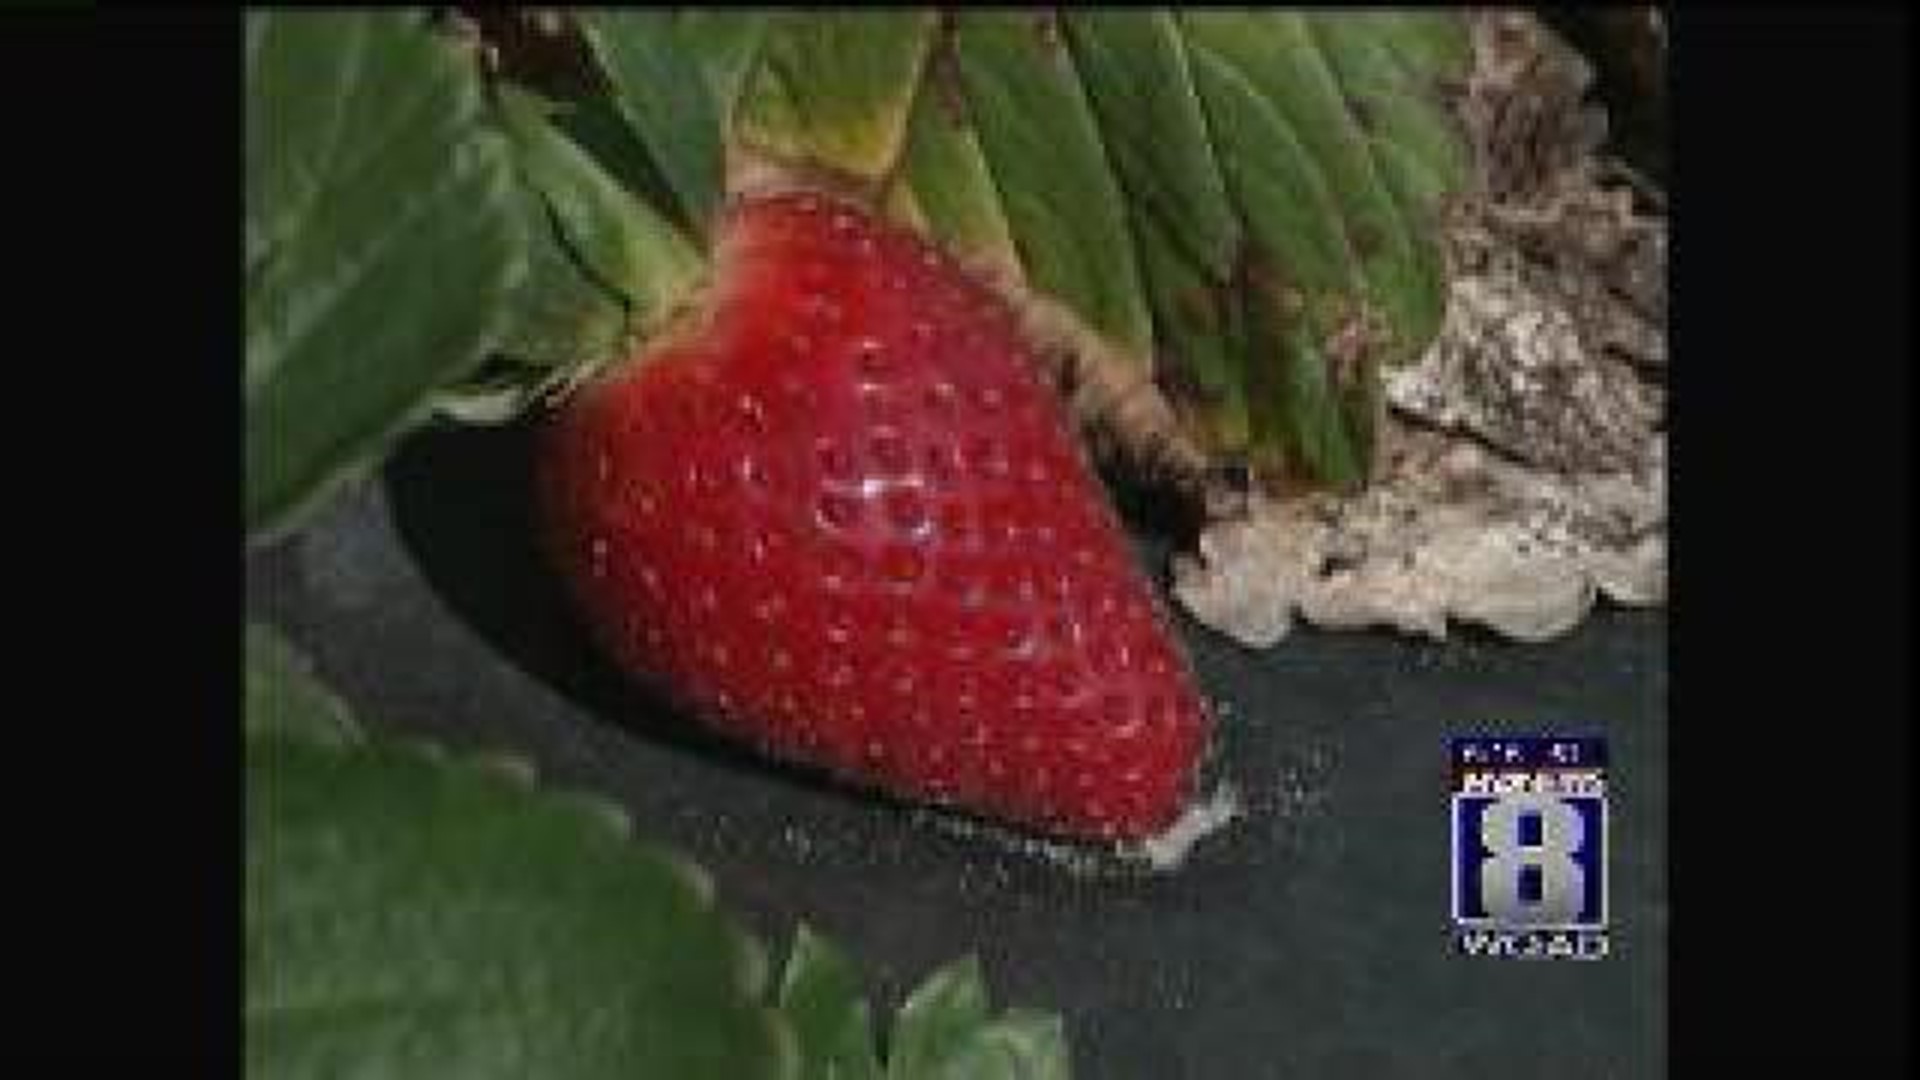 Ag in the AM: Strawberries